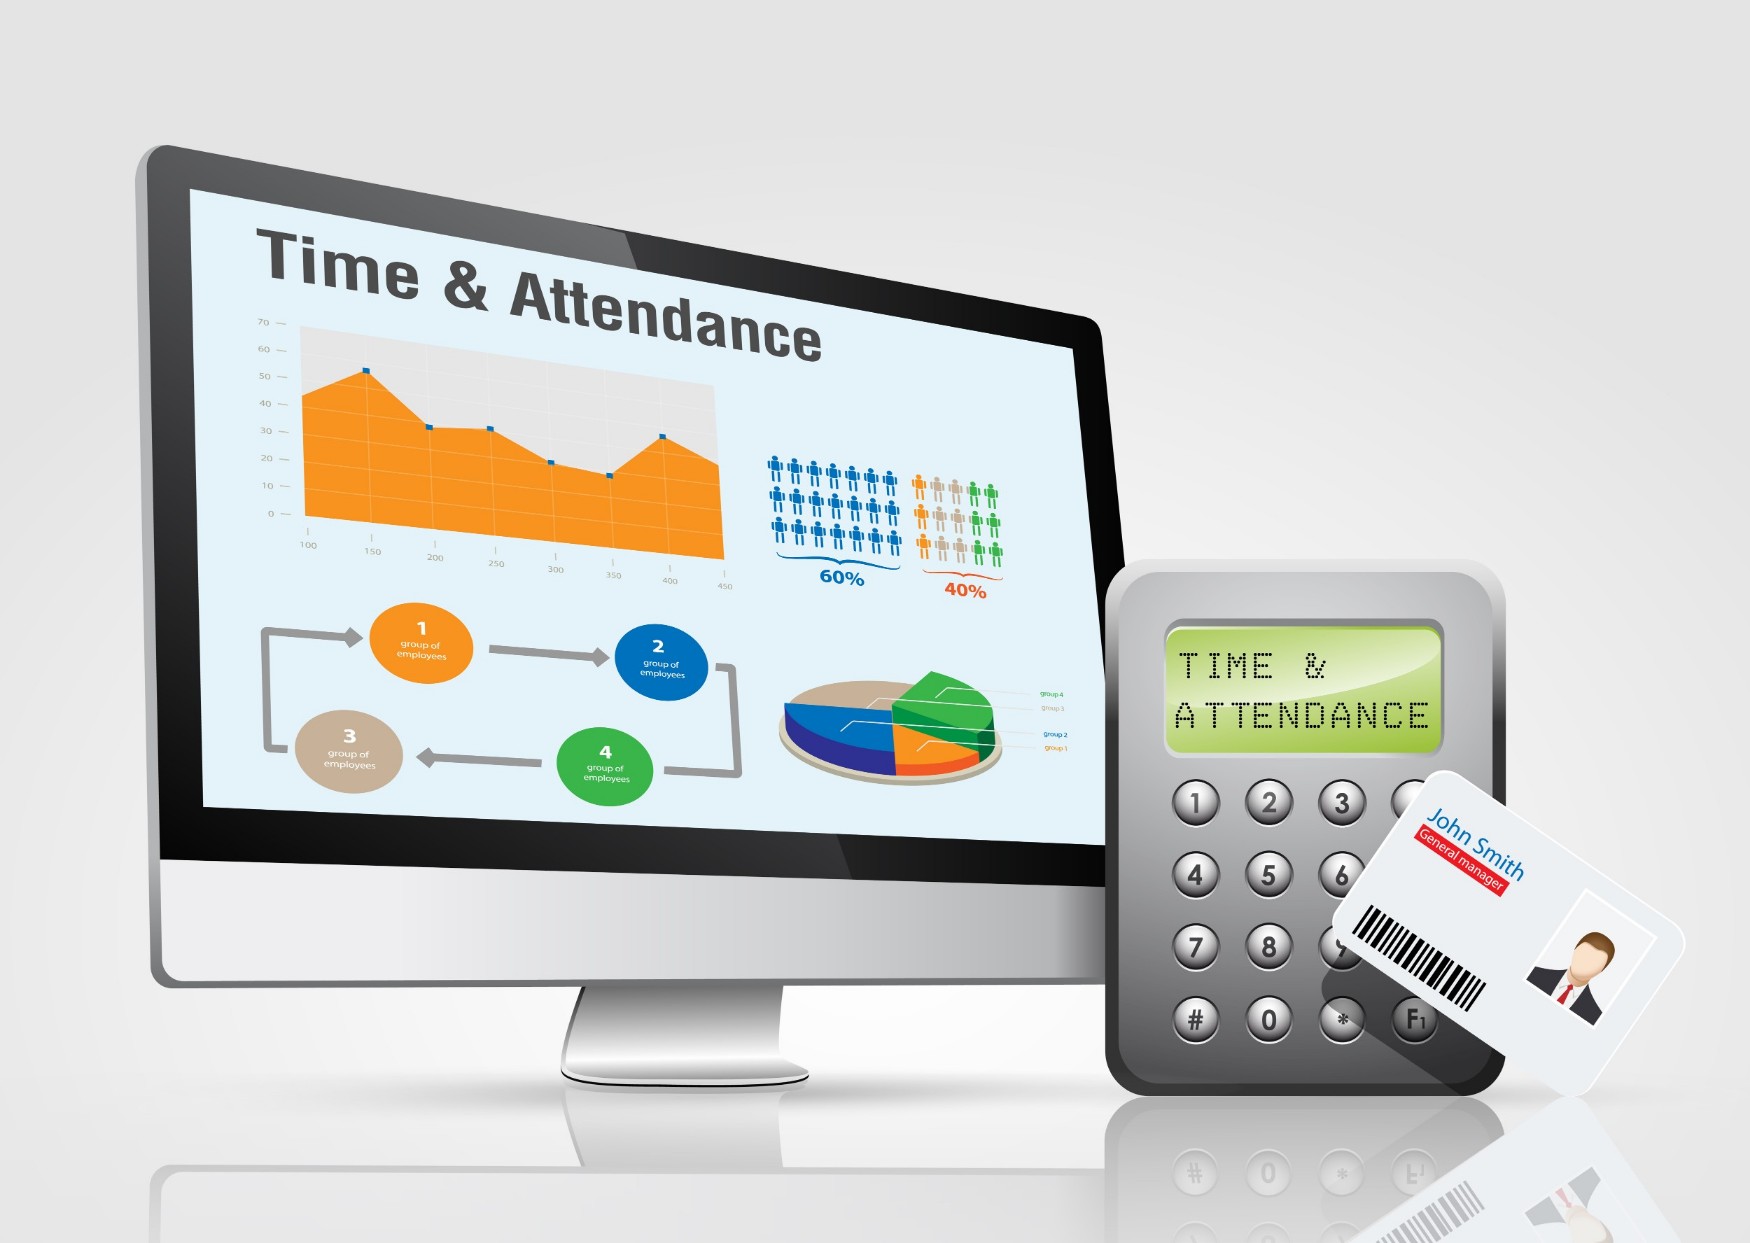 Why Should You Consider Using A Time and Attendance System